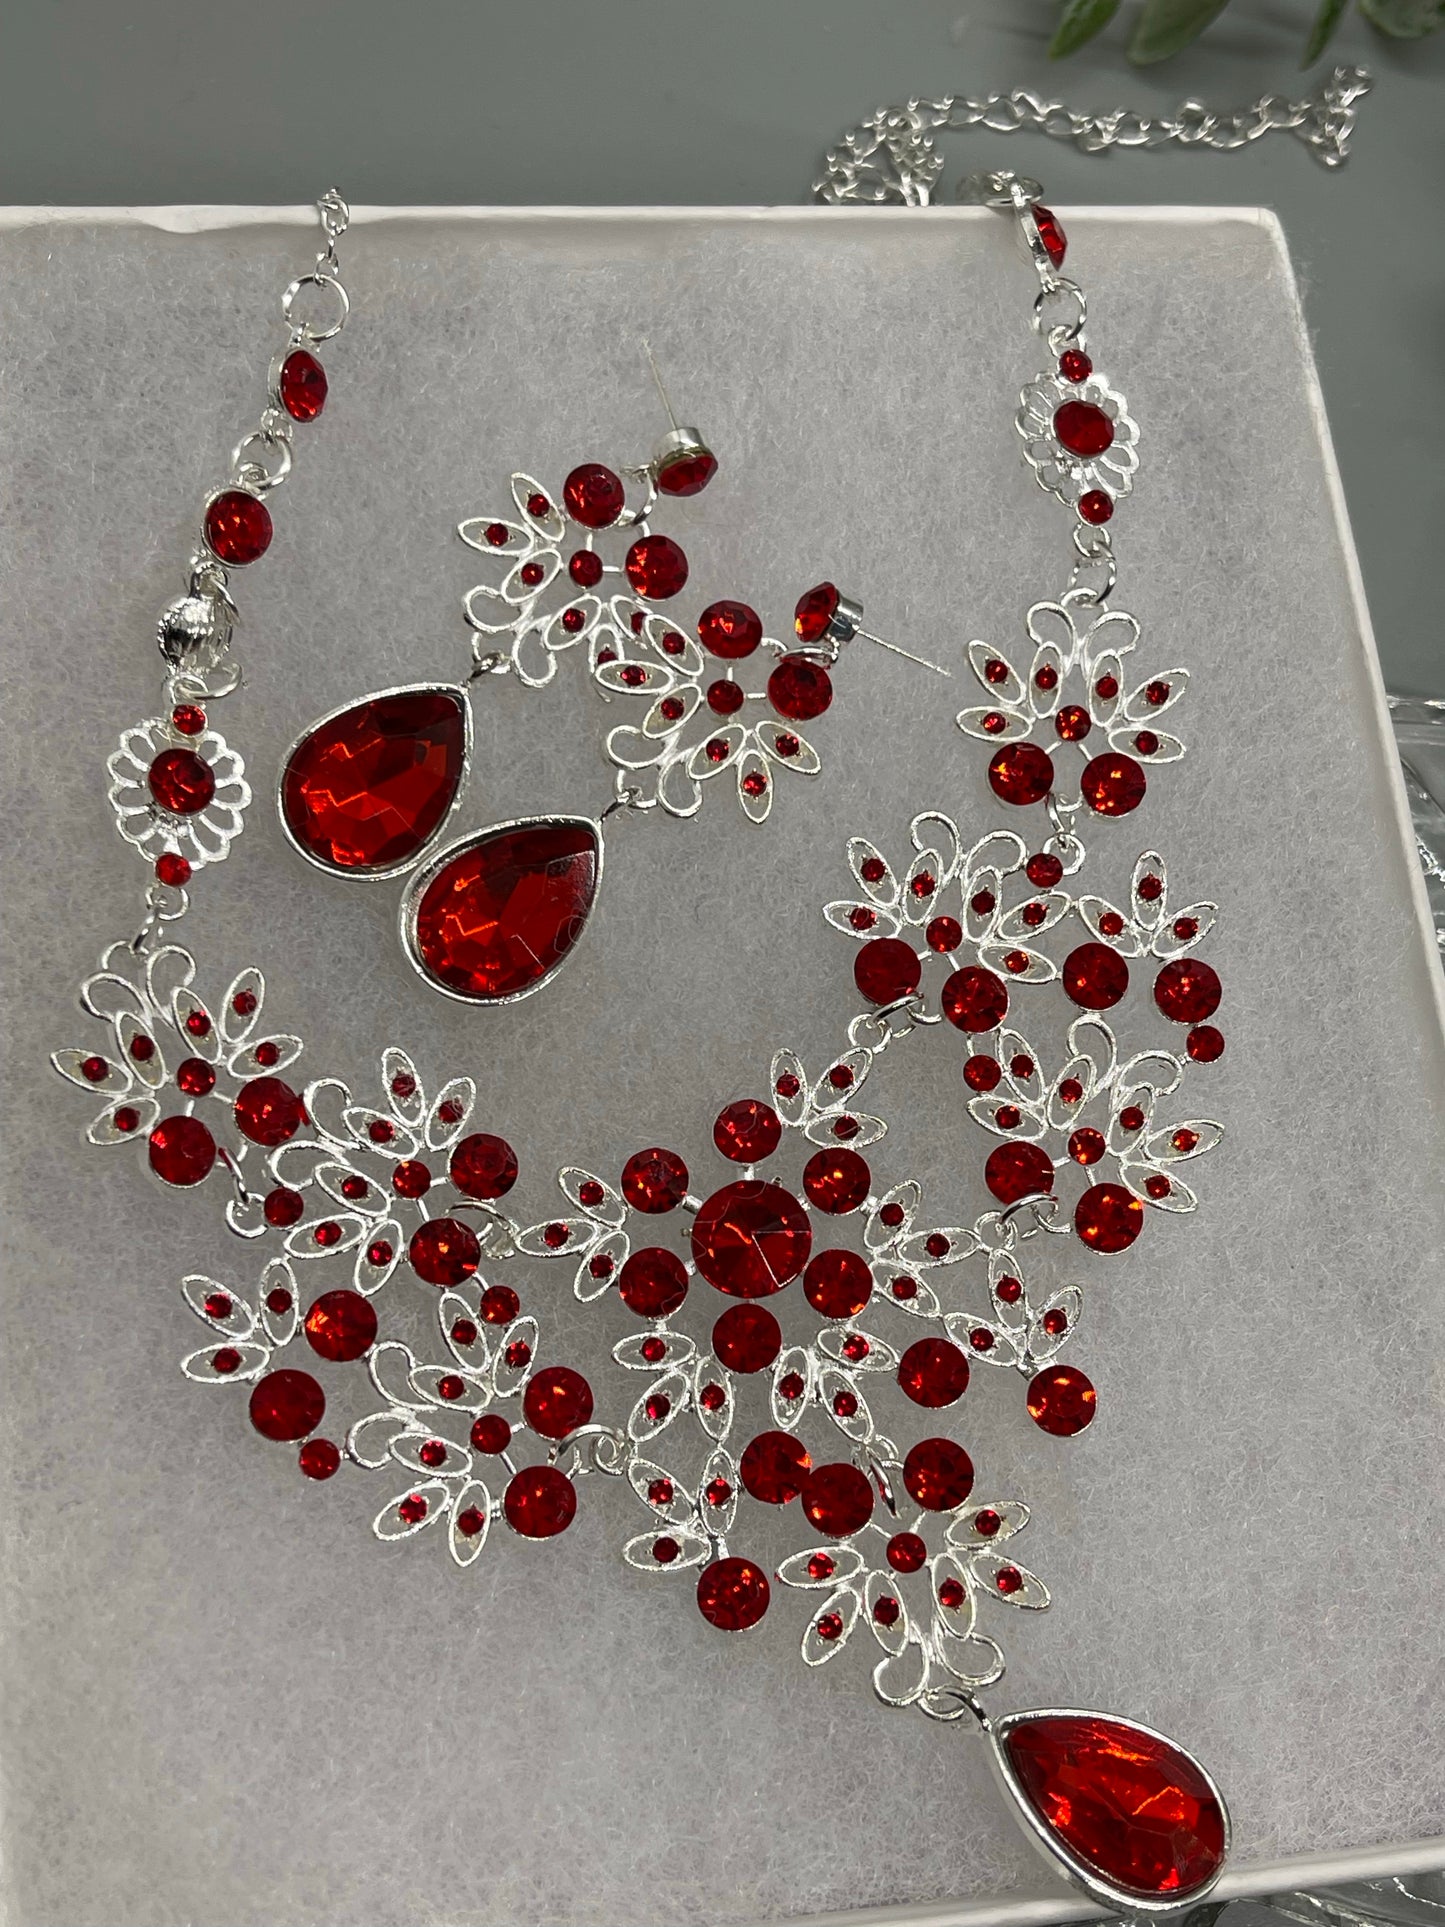 Ruby Red rhinestone crystal necklace earrings set Rhinestone Jewelry Sets earring necklace wedding engagement formal party Prom sweet 16 sets